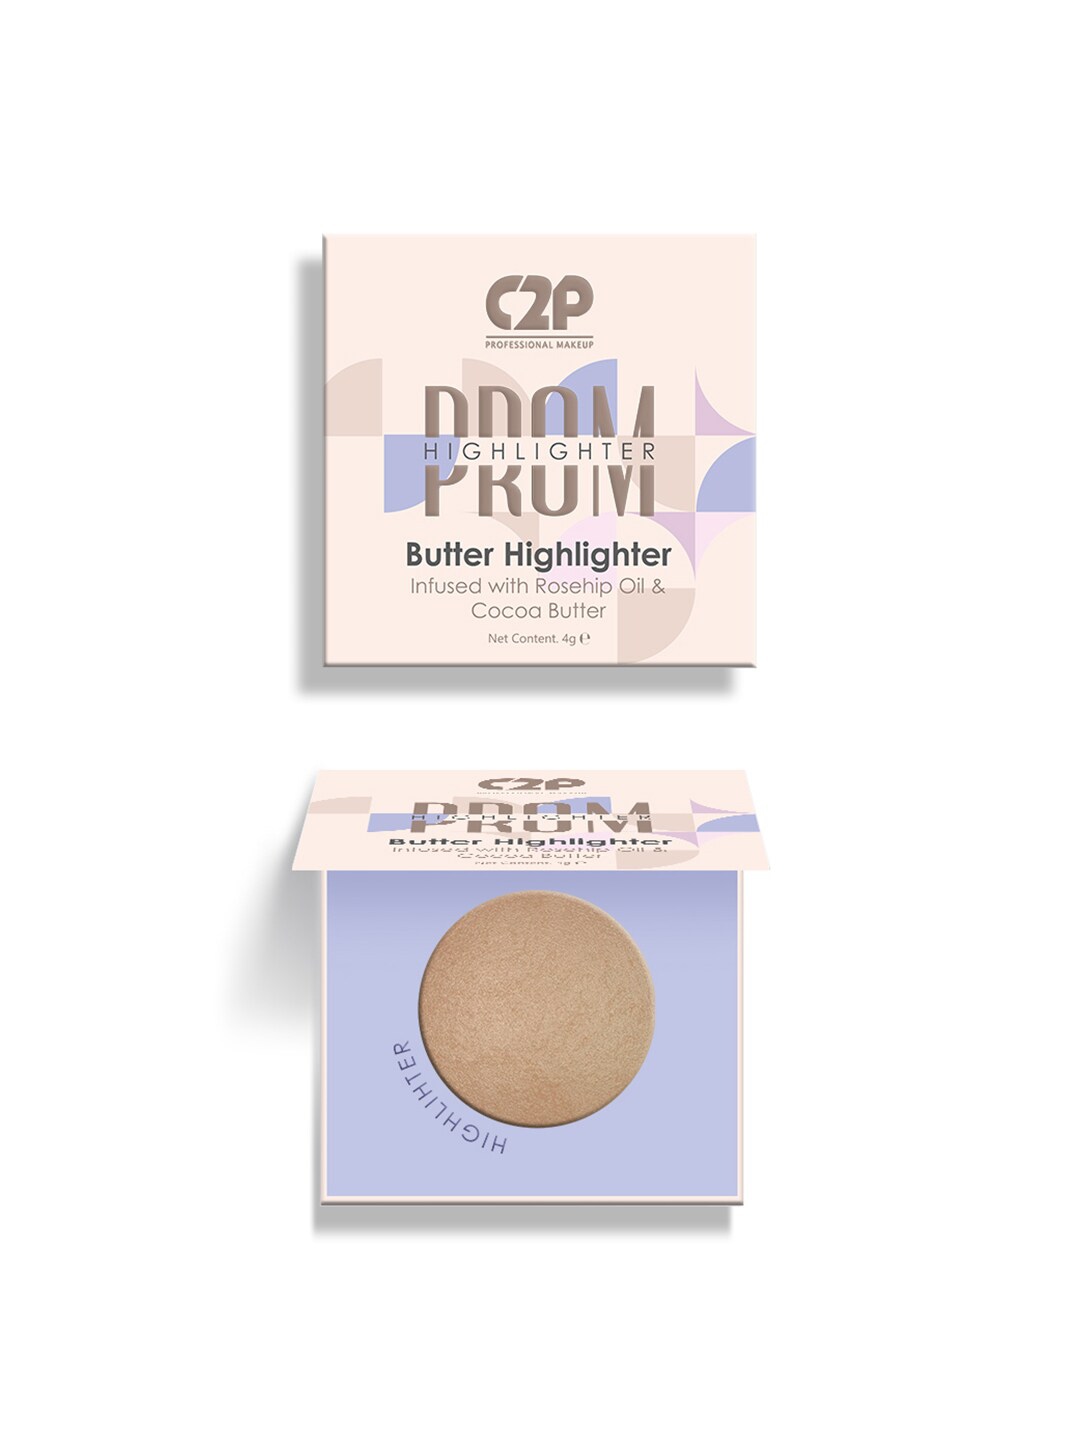 

C2P PROFESSIONAL MAKEUP Prom Butter Highlighter - 4g - Champagne Pop 02, Pink